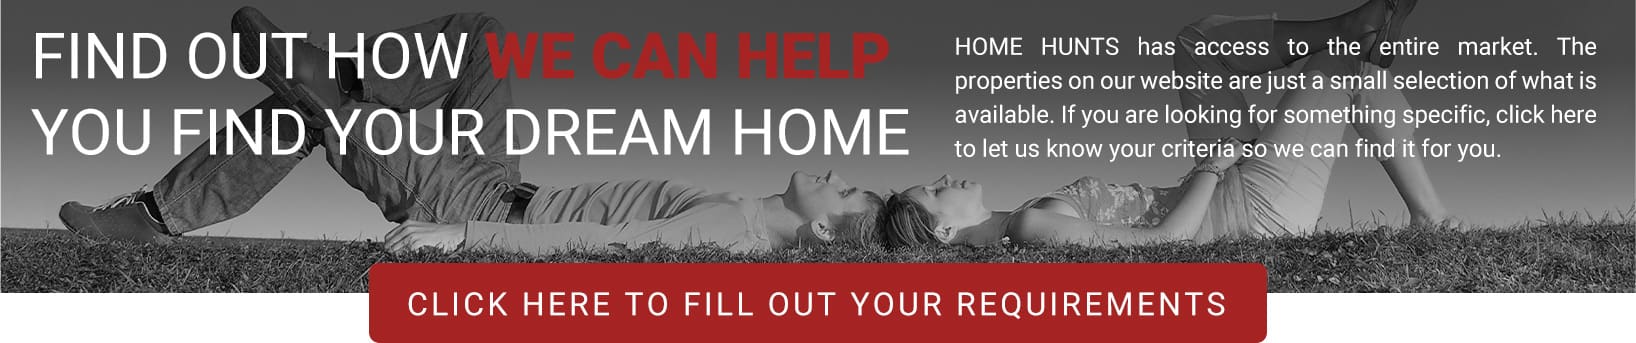 Find out how we can help you find your perfect home - Click Here